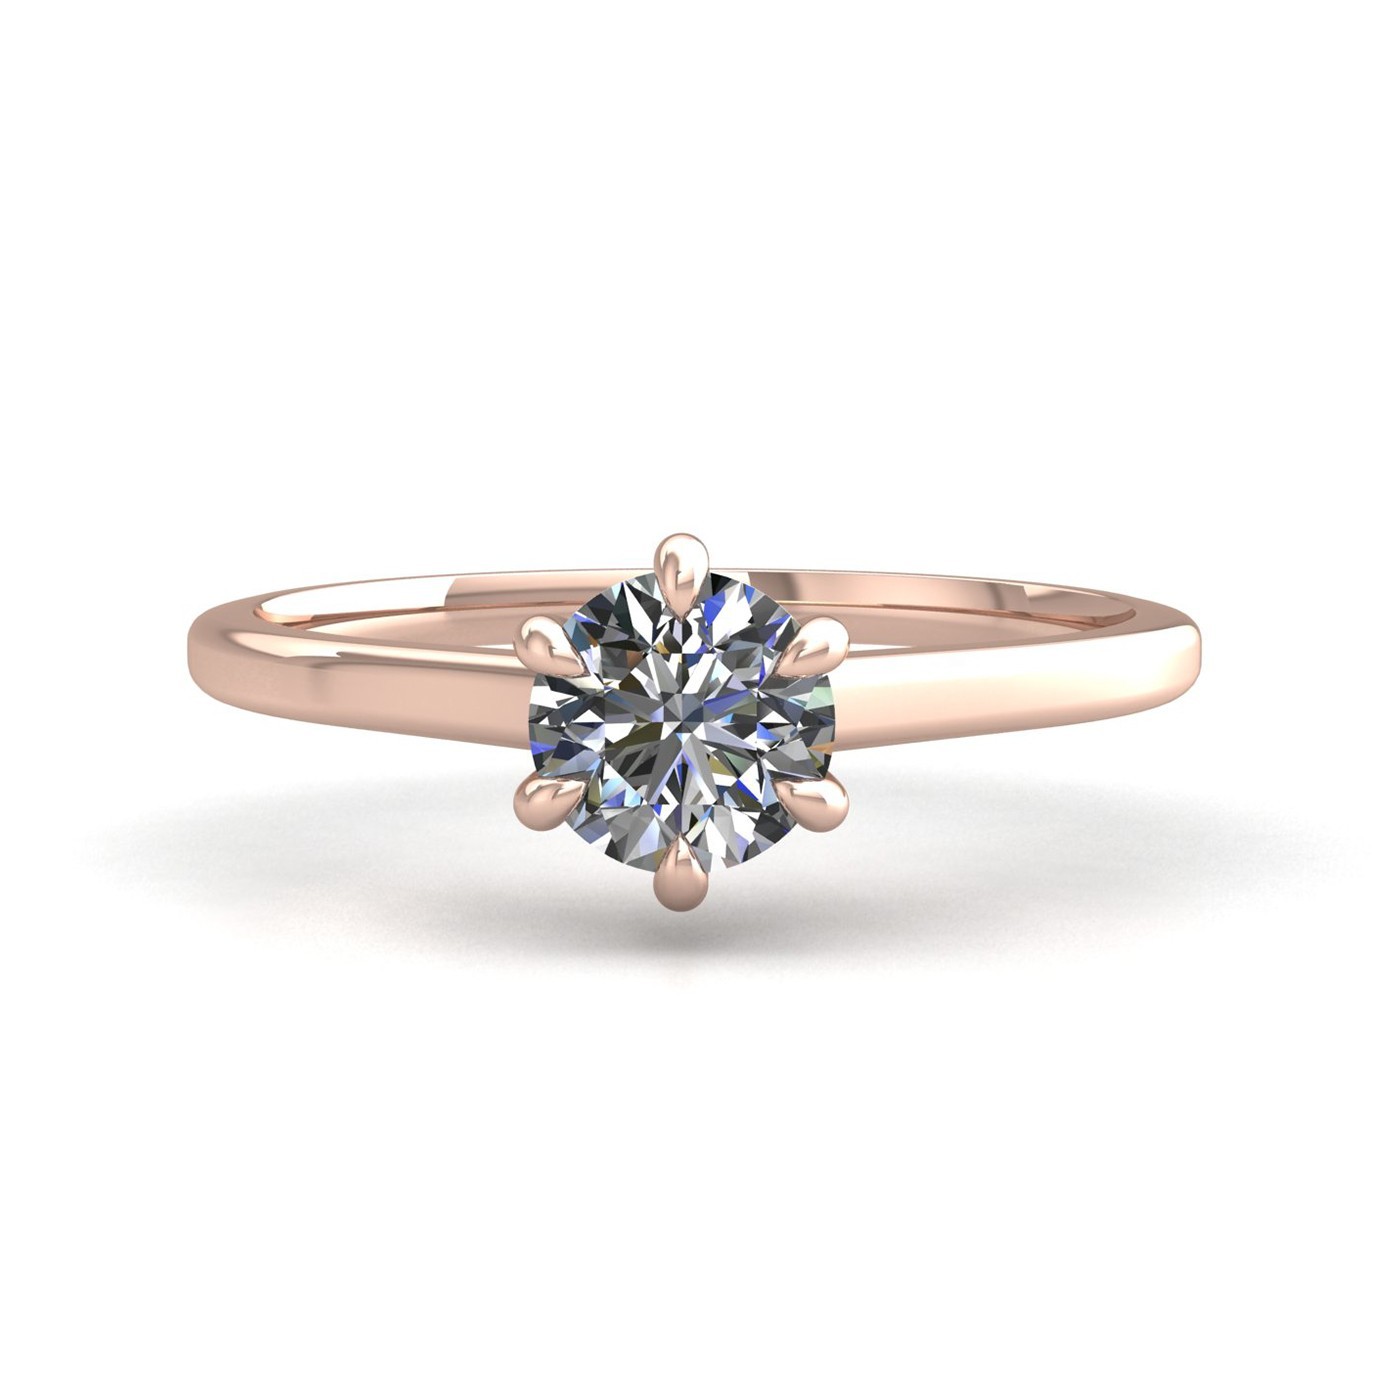 18k rose gold 2,00 ct 6 prongs solitaire round cut diamond engagement ring with whisper thin band Photos & images